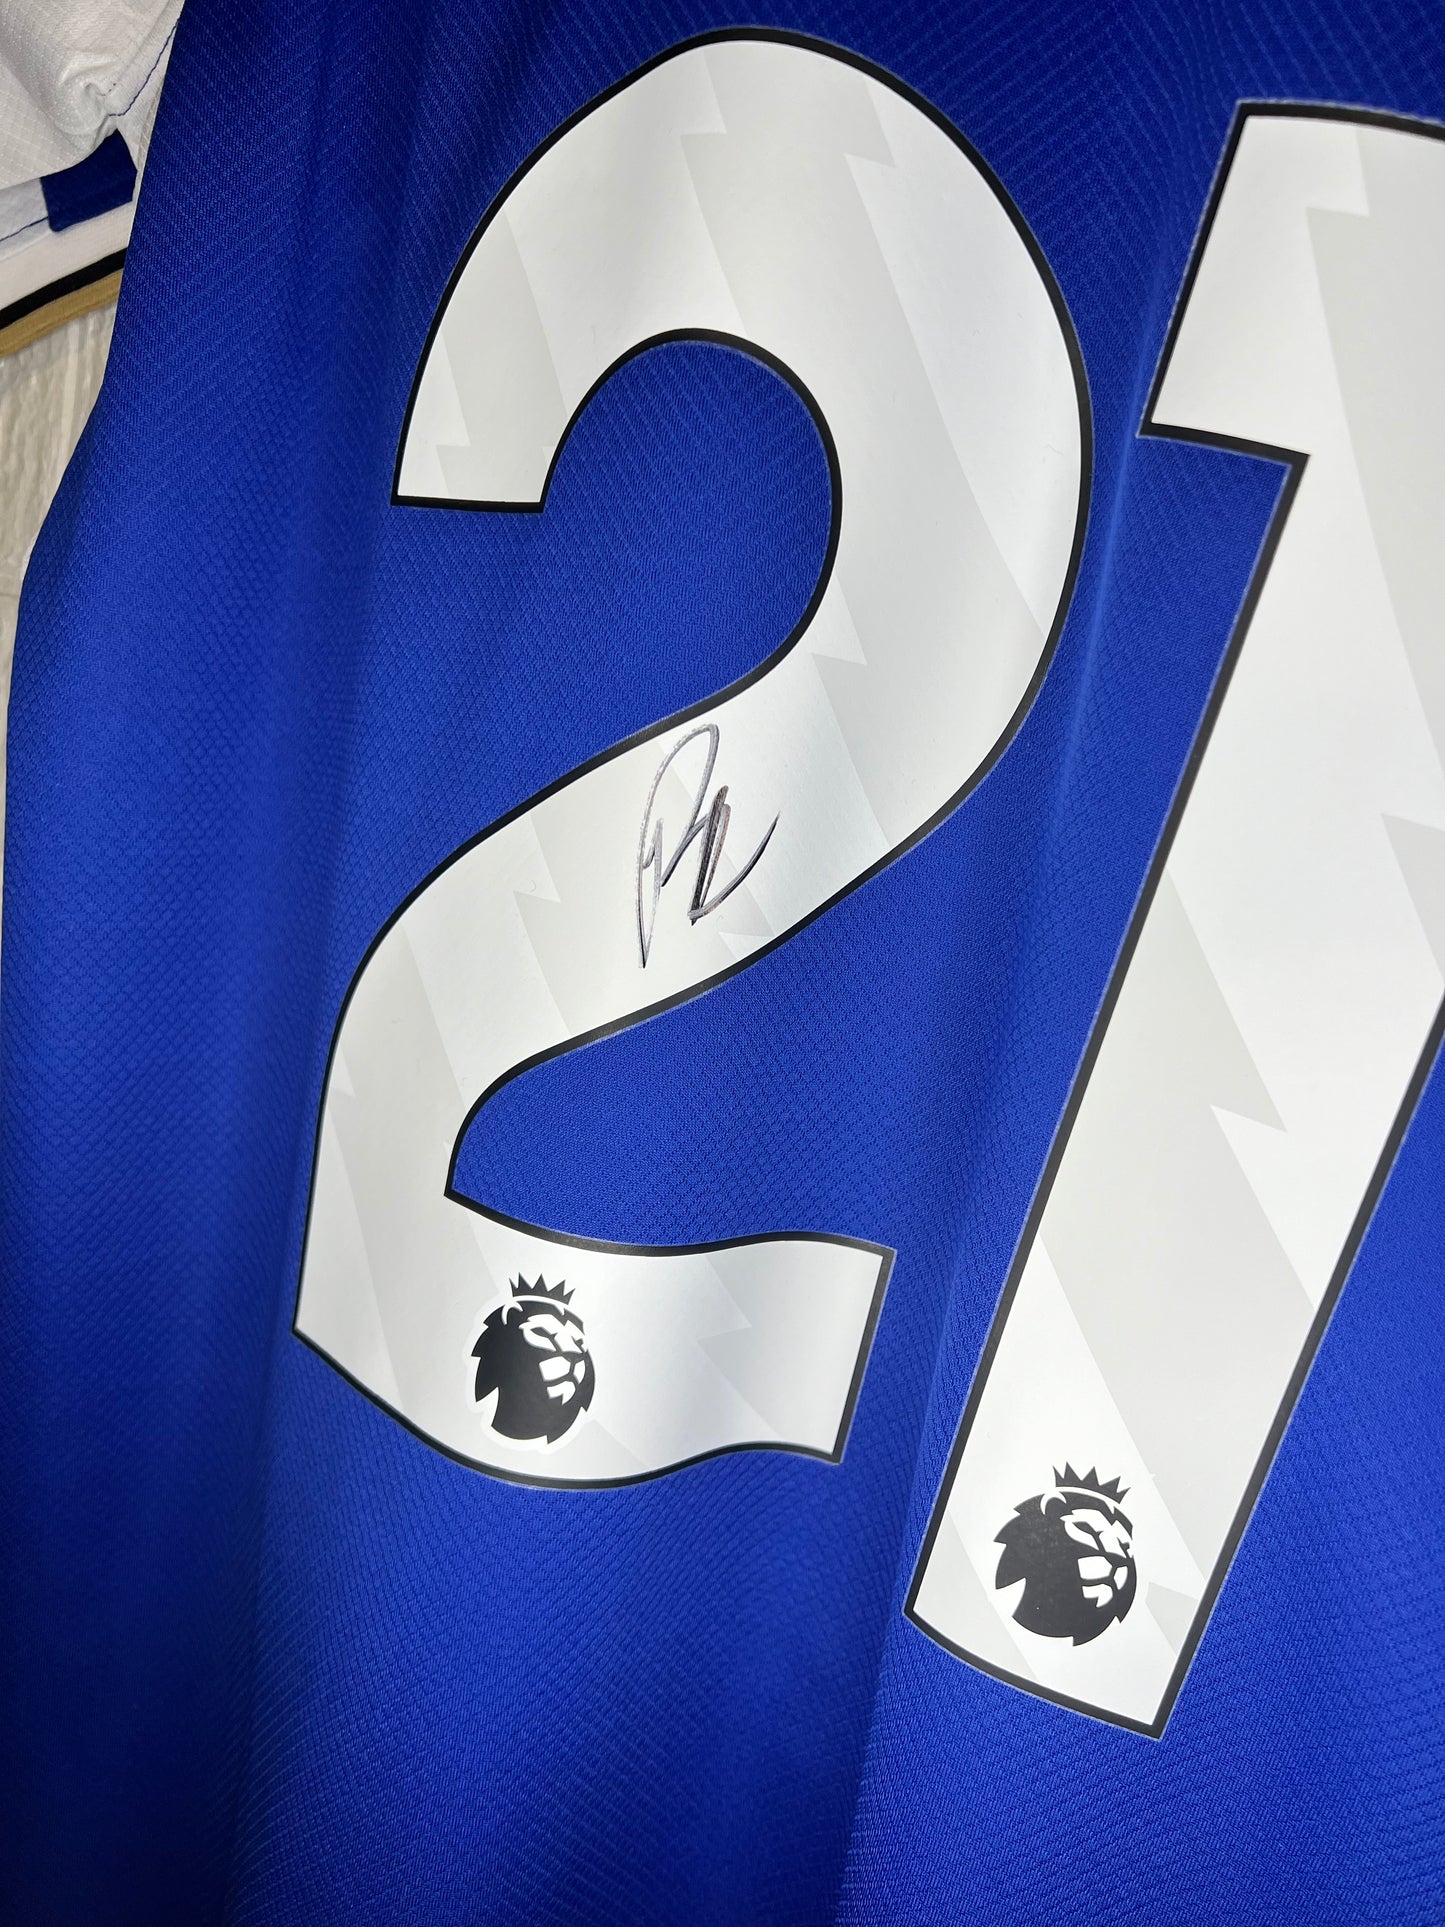 Chilwell signed Chelsea shirt